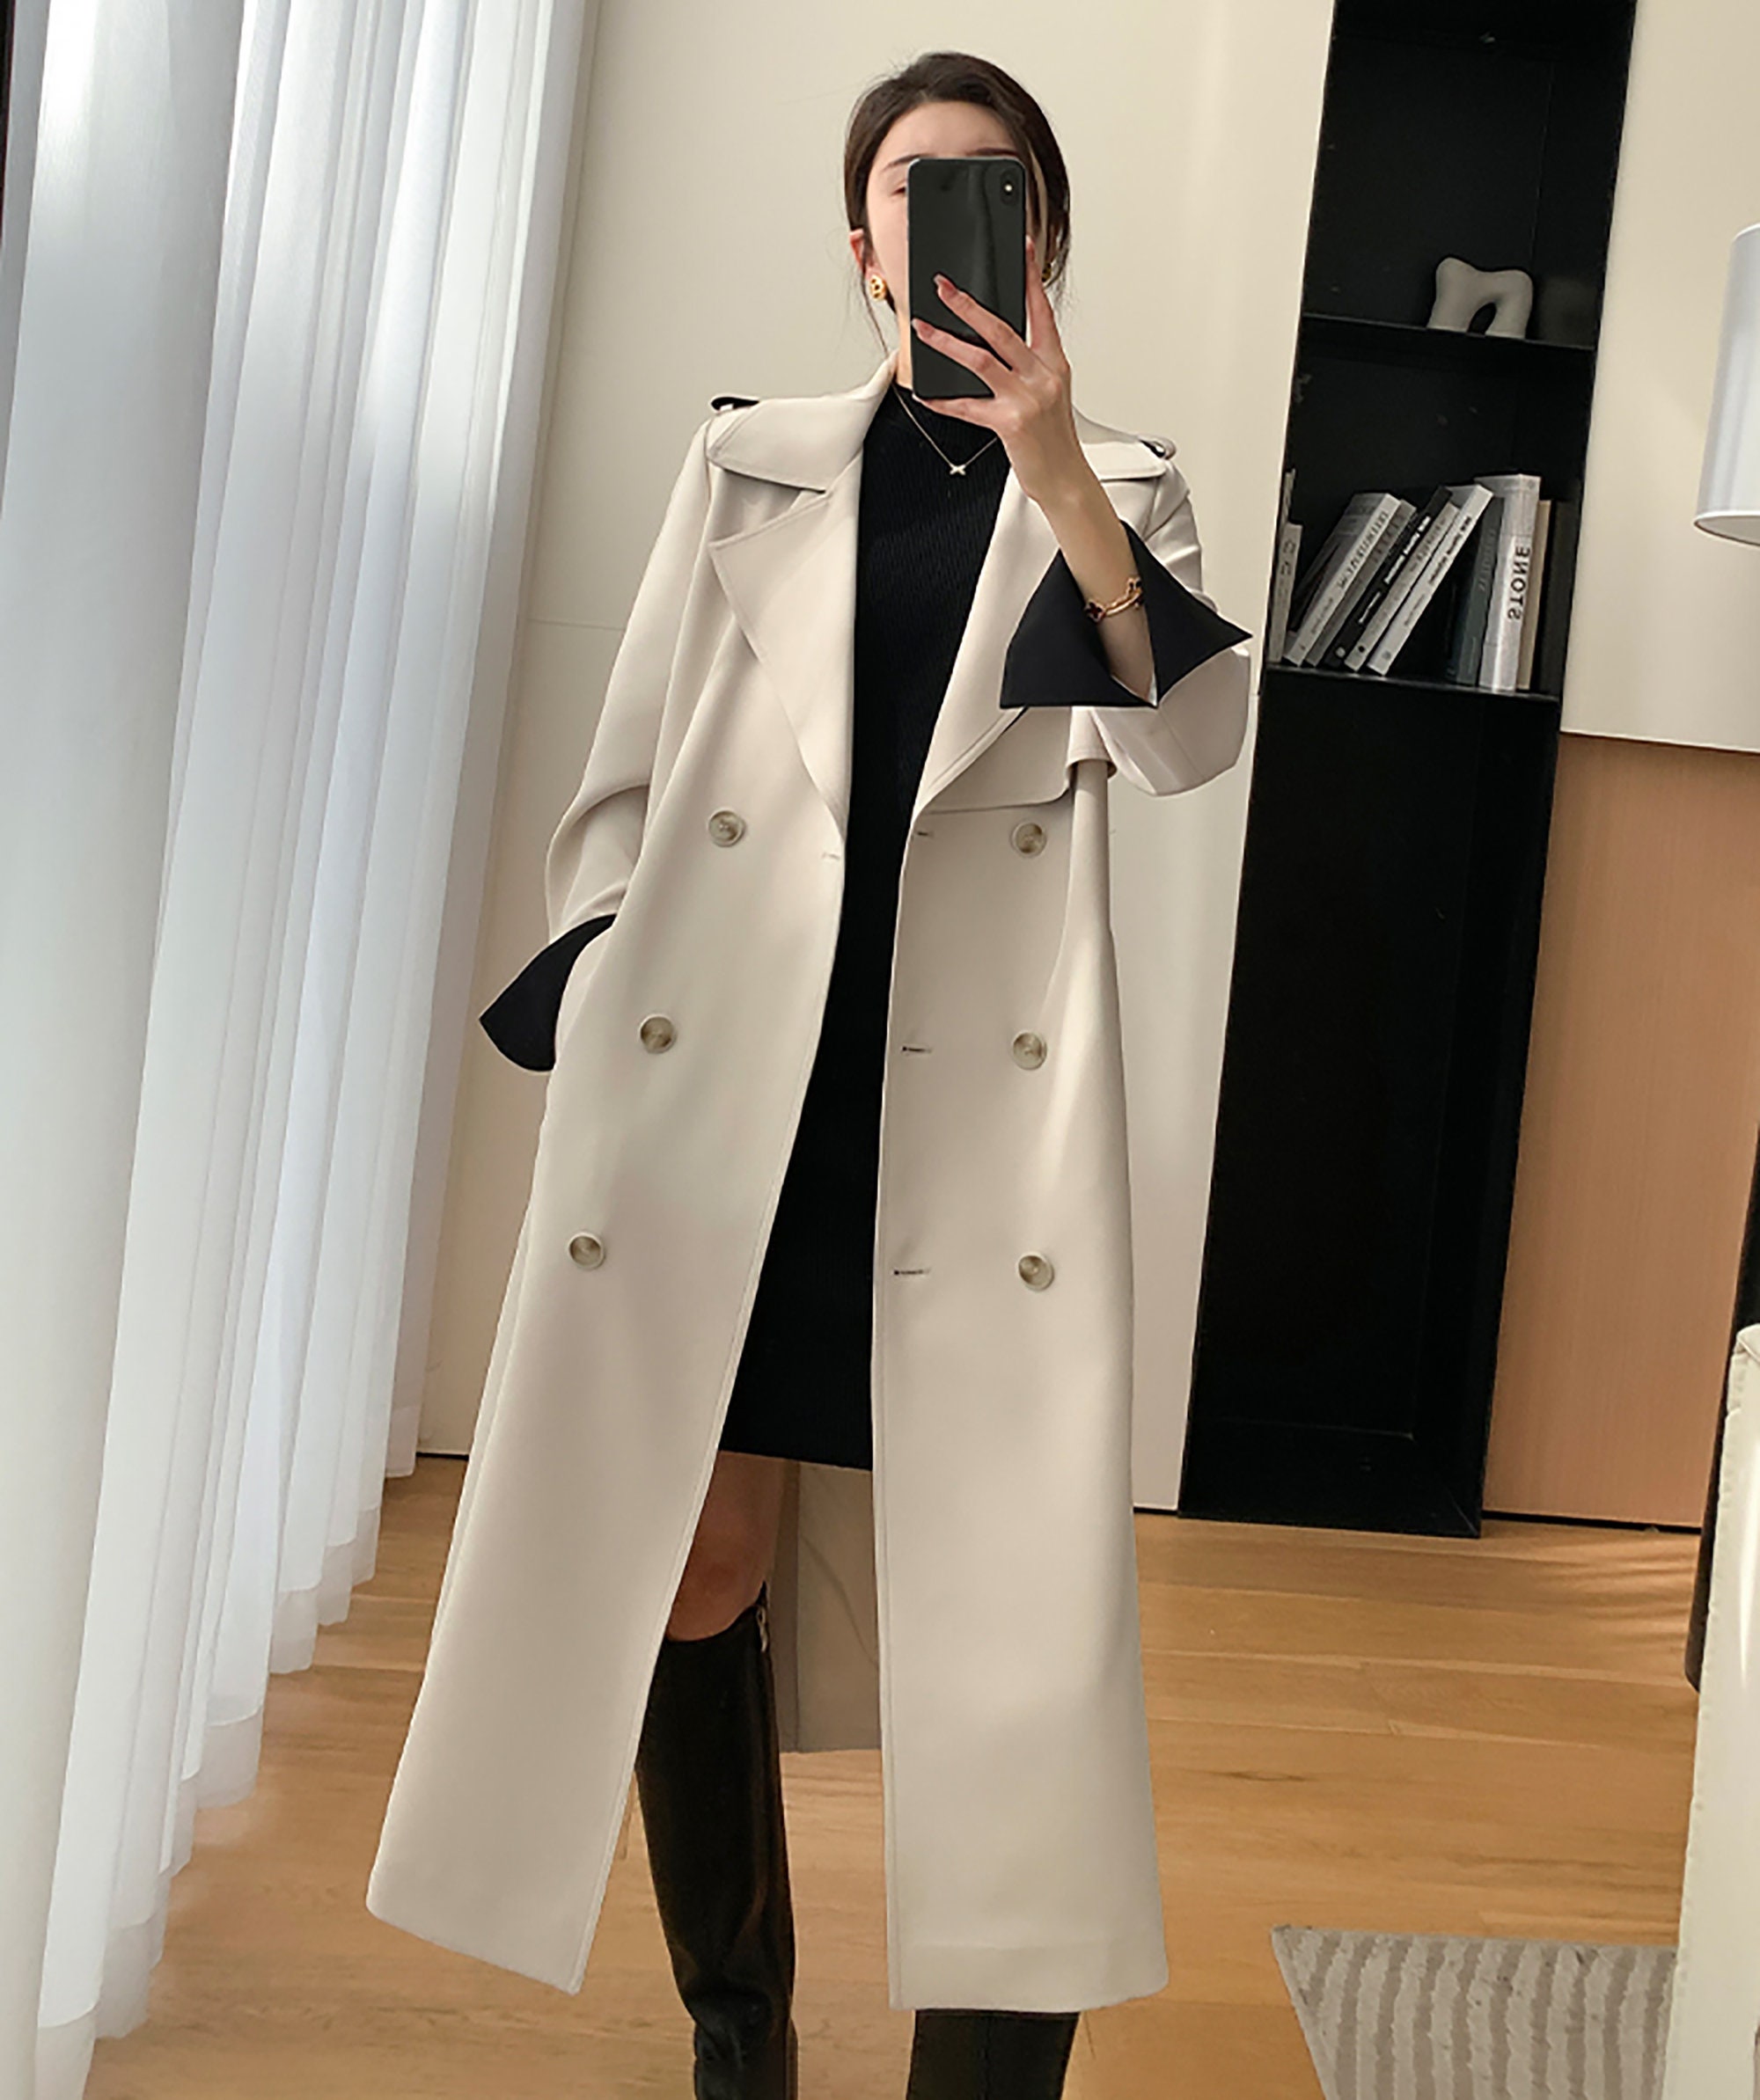 ebossy Women's Convertible Collar Double Breasted Long Wool Trench Coat Overcoat with Belt 